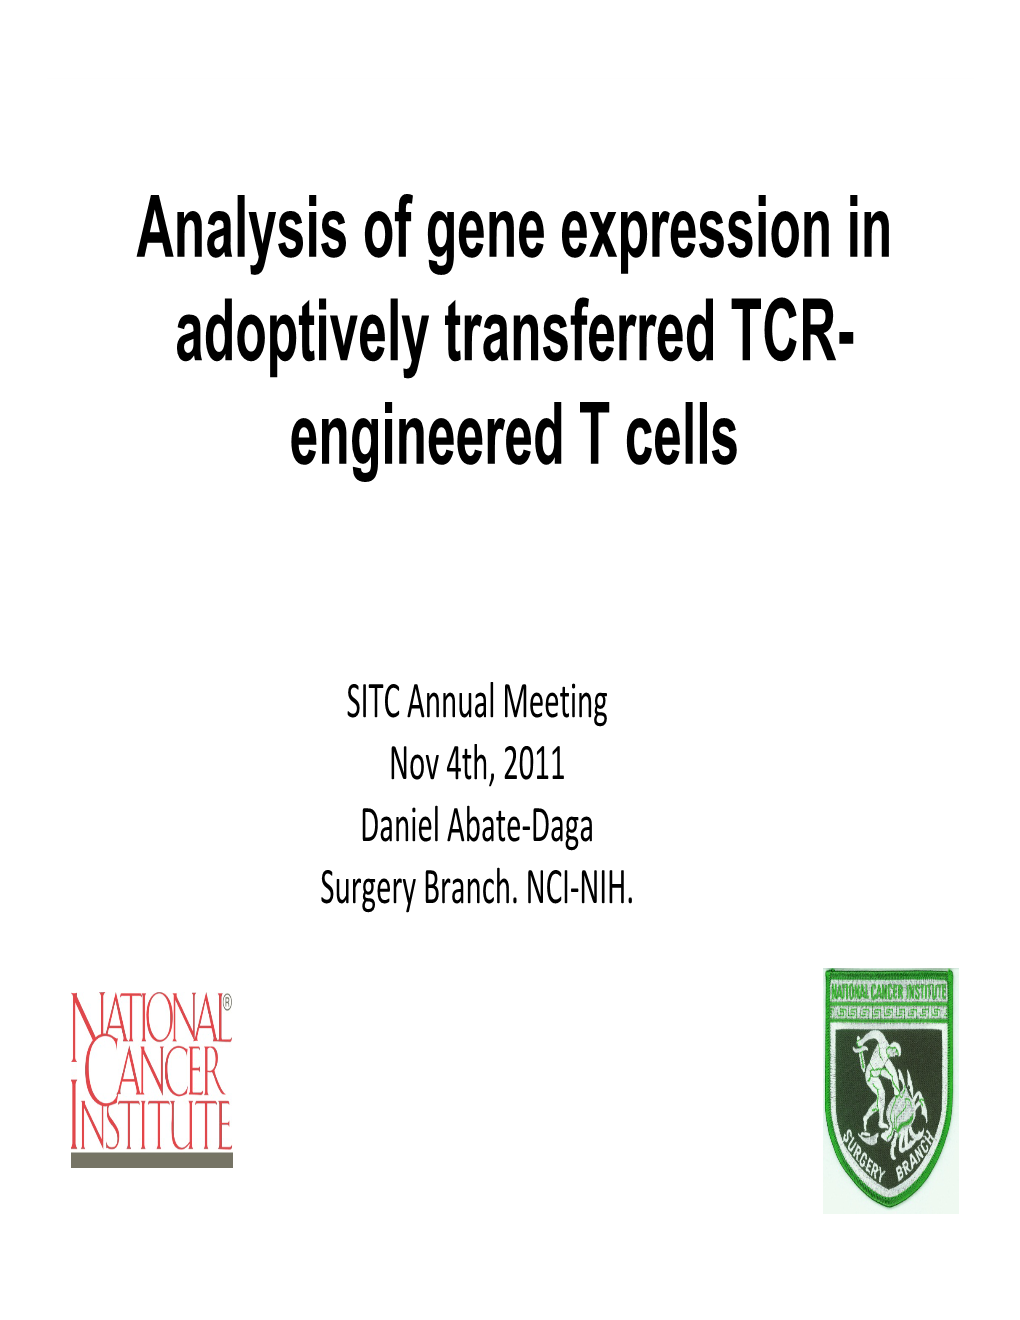 Analysis of Gene Expression in Adoptively Transferred TCR- Engineered T Cells